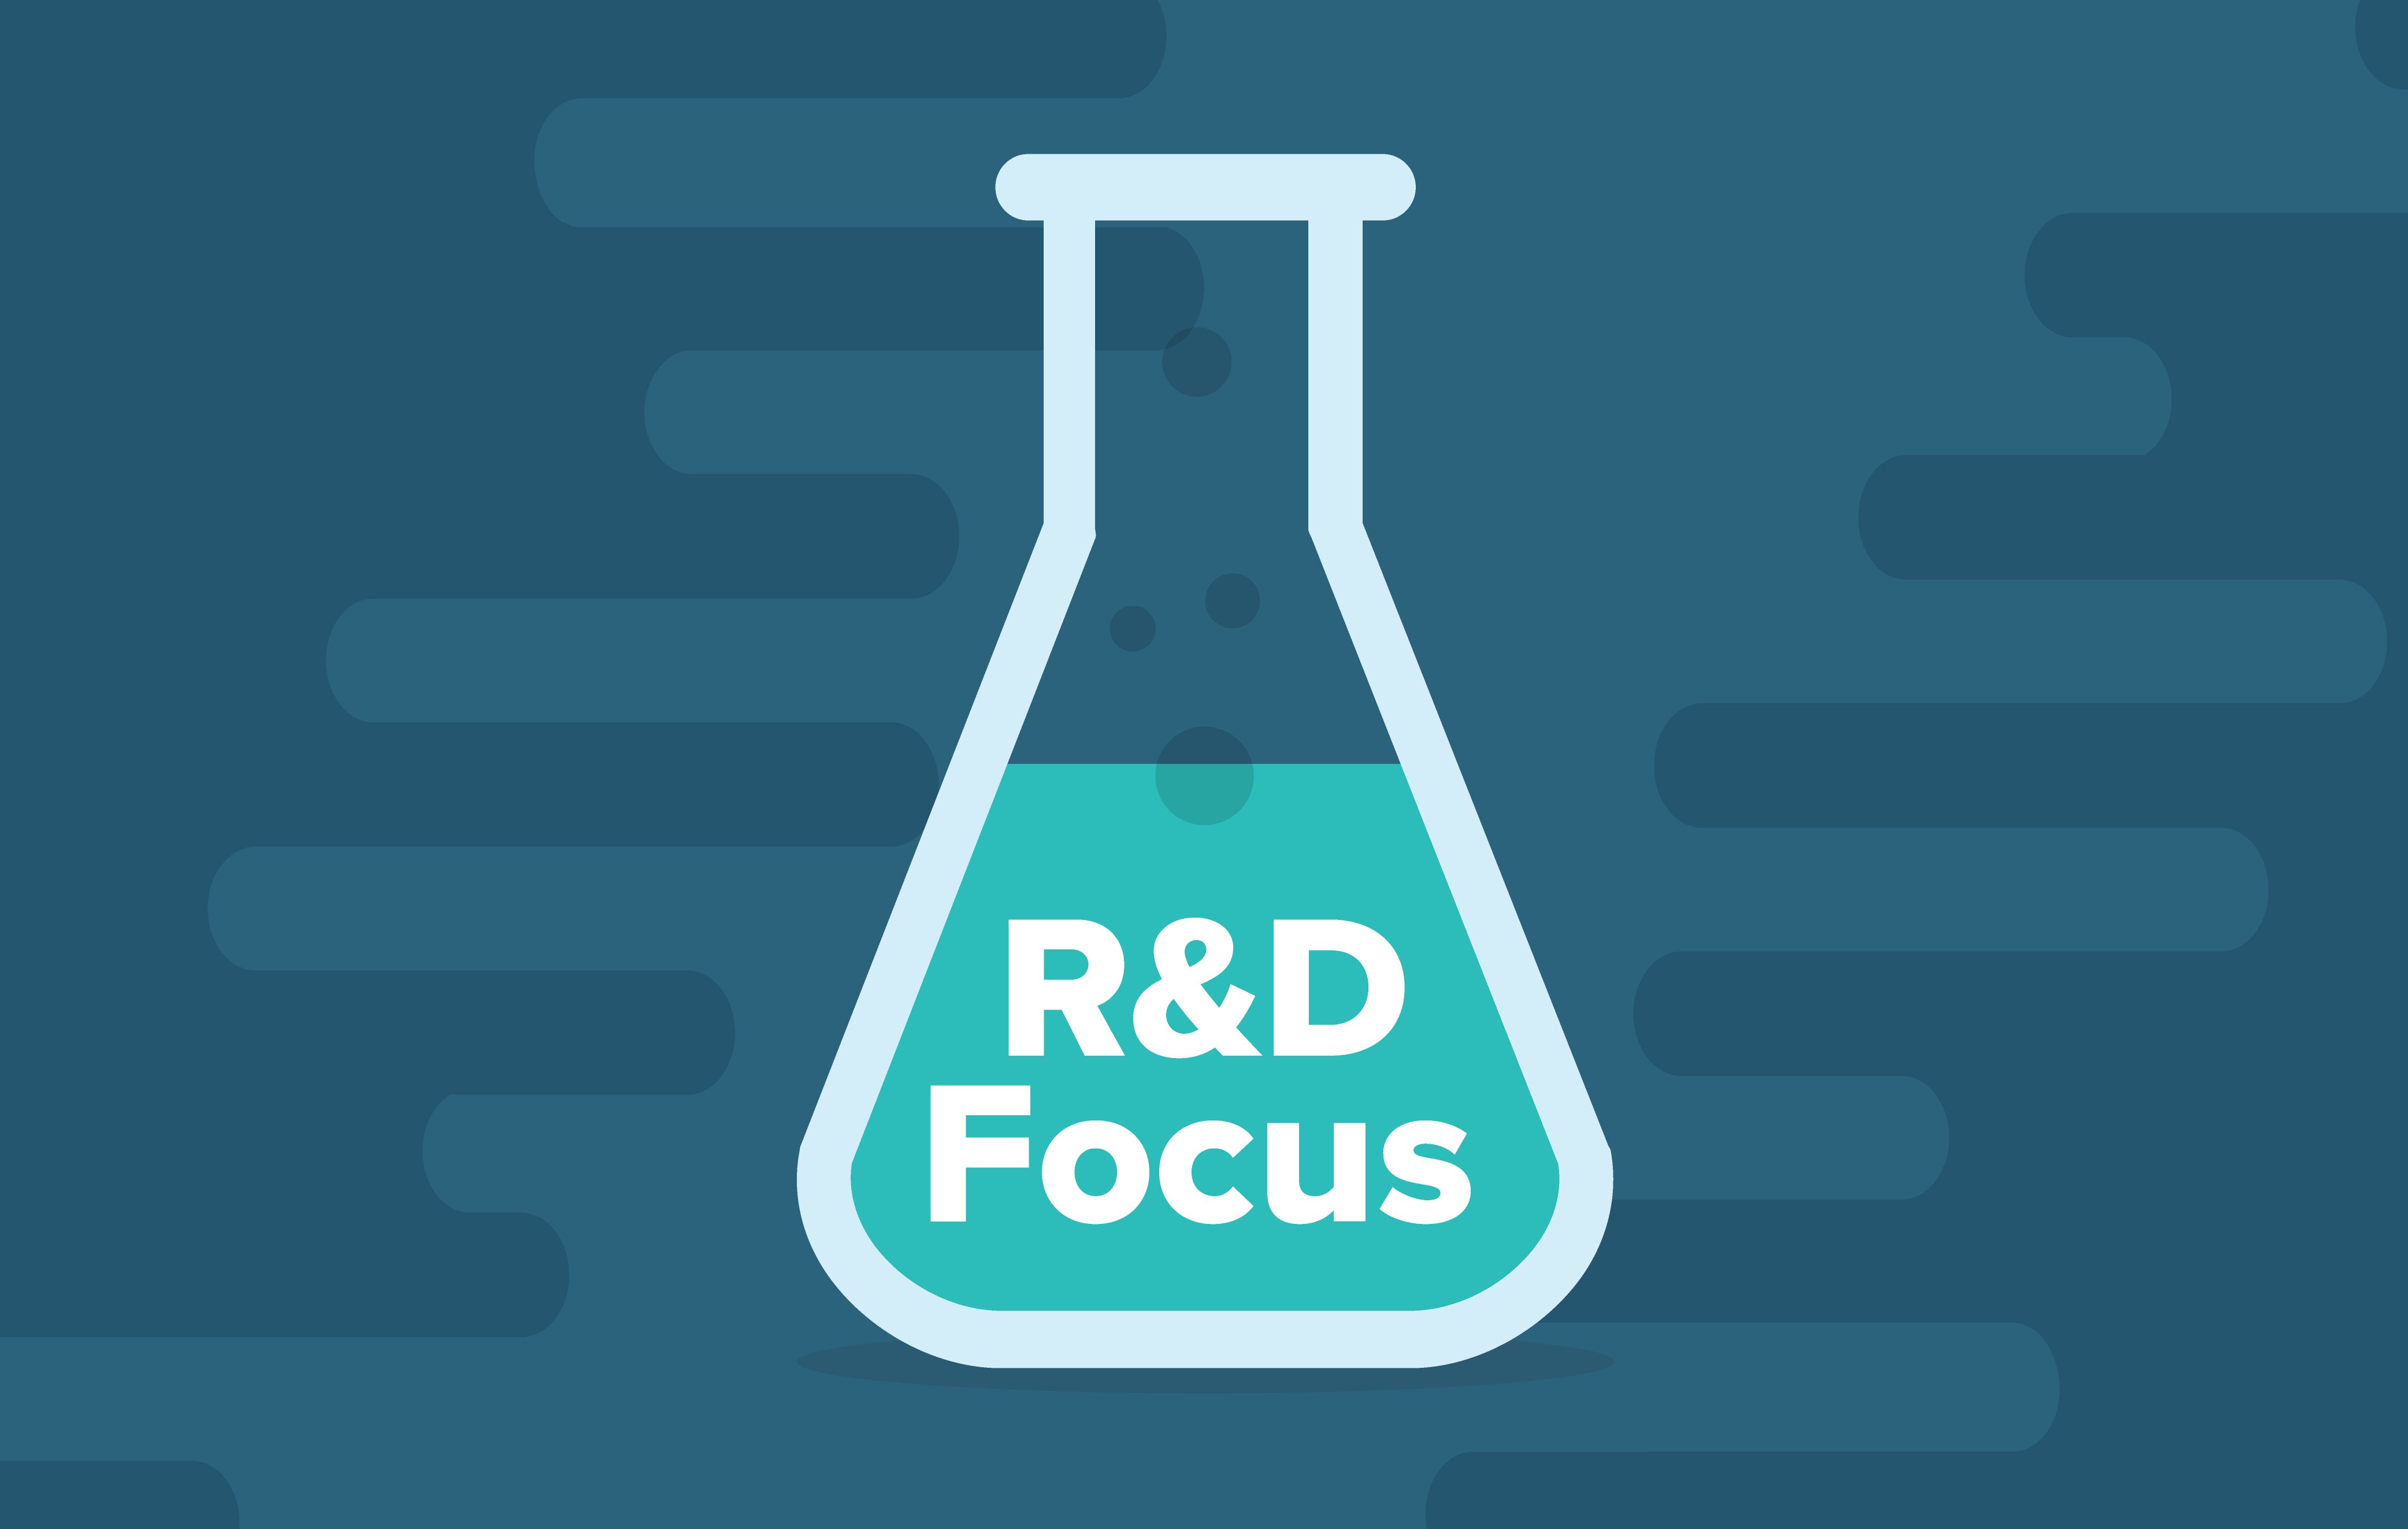 rd-focus-it-takes-an-ecosystem-to-deliver-innovative-new-therapies